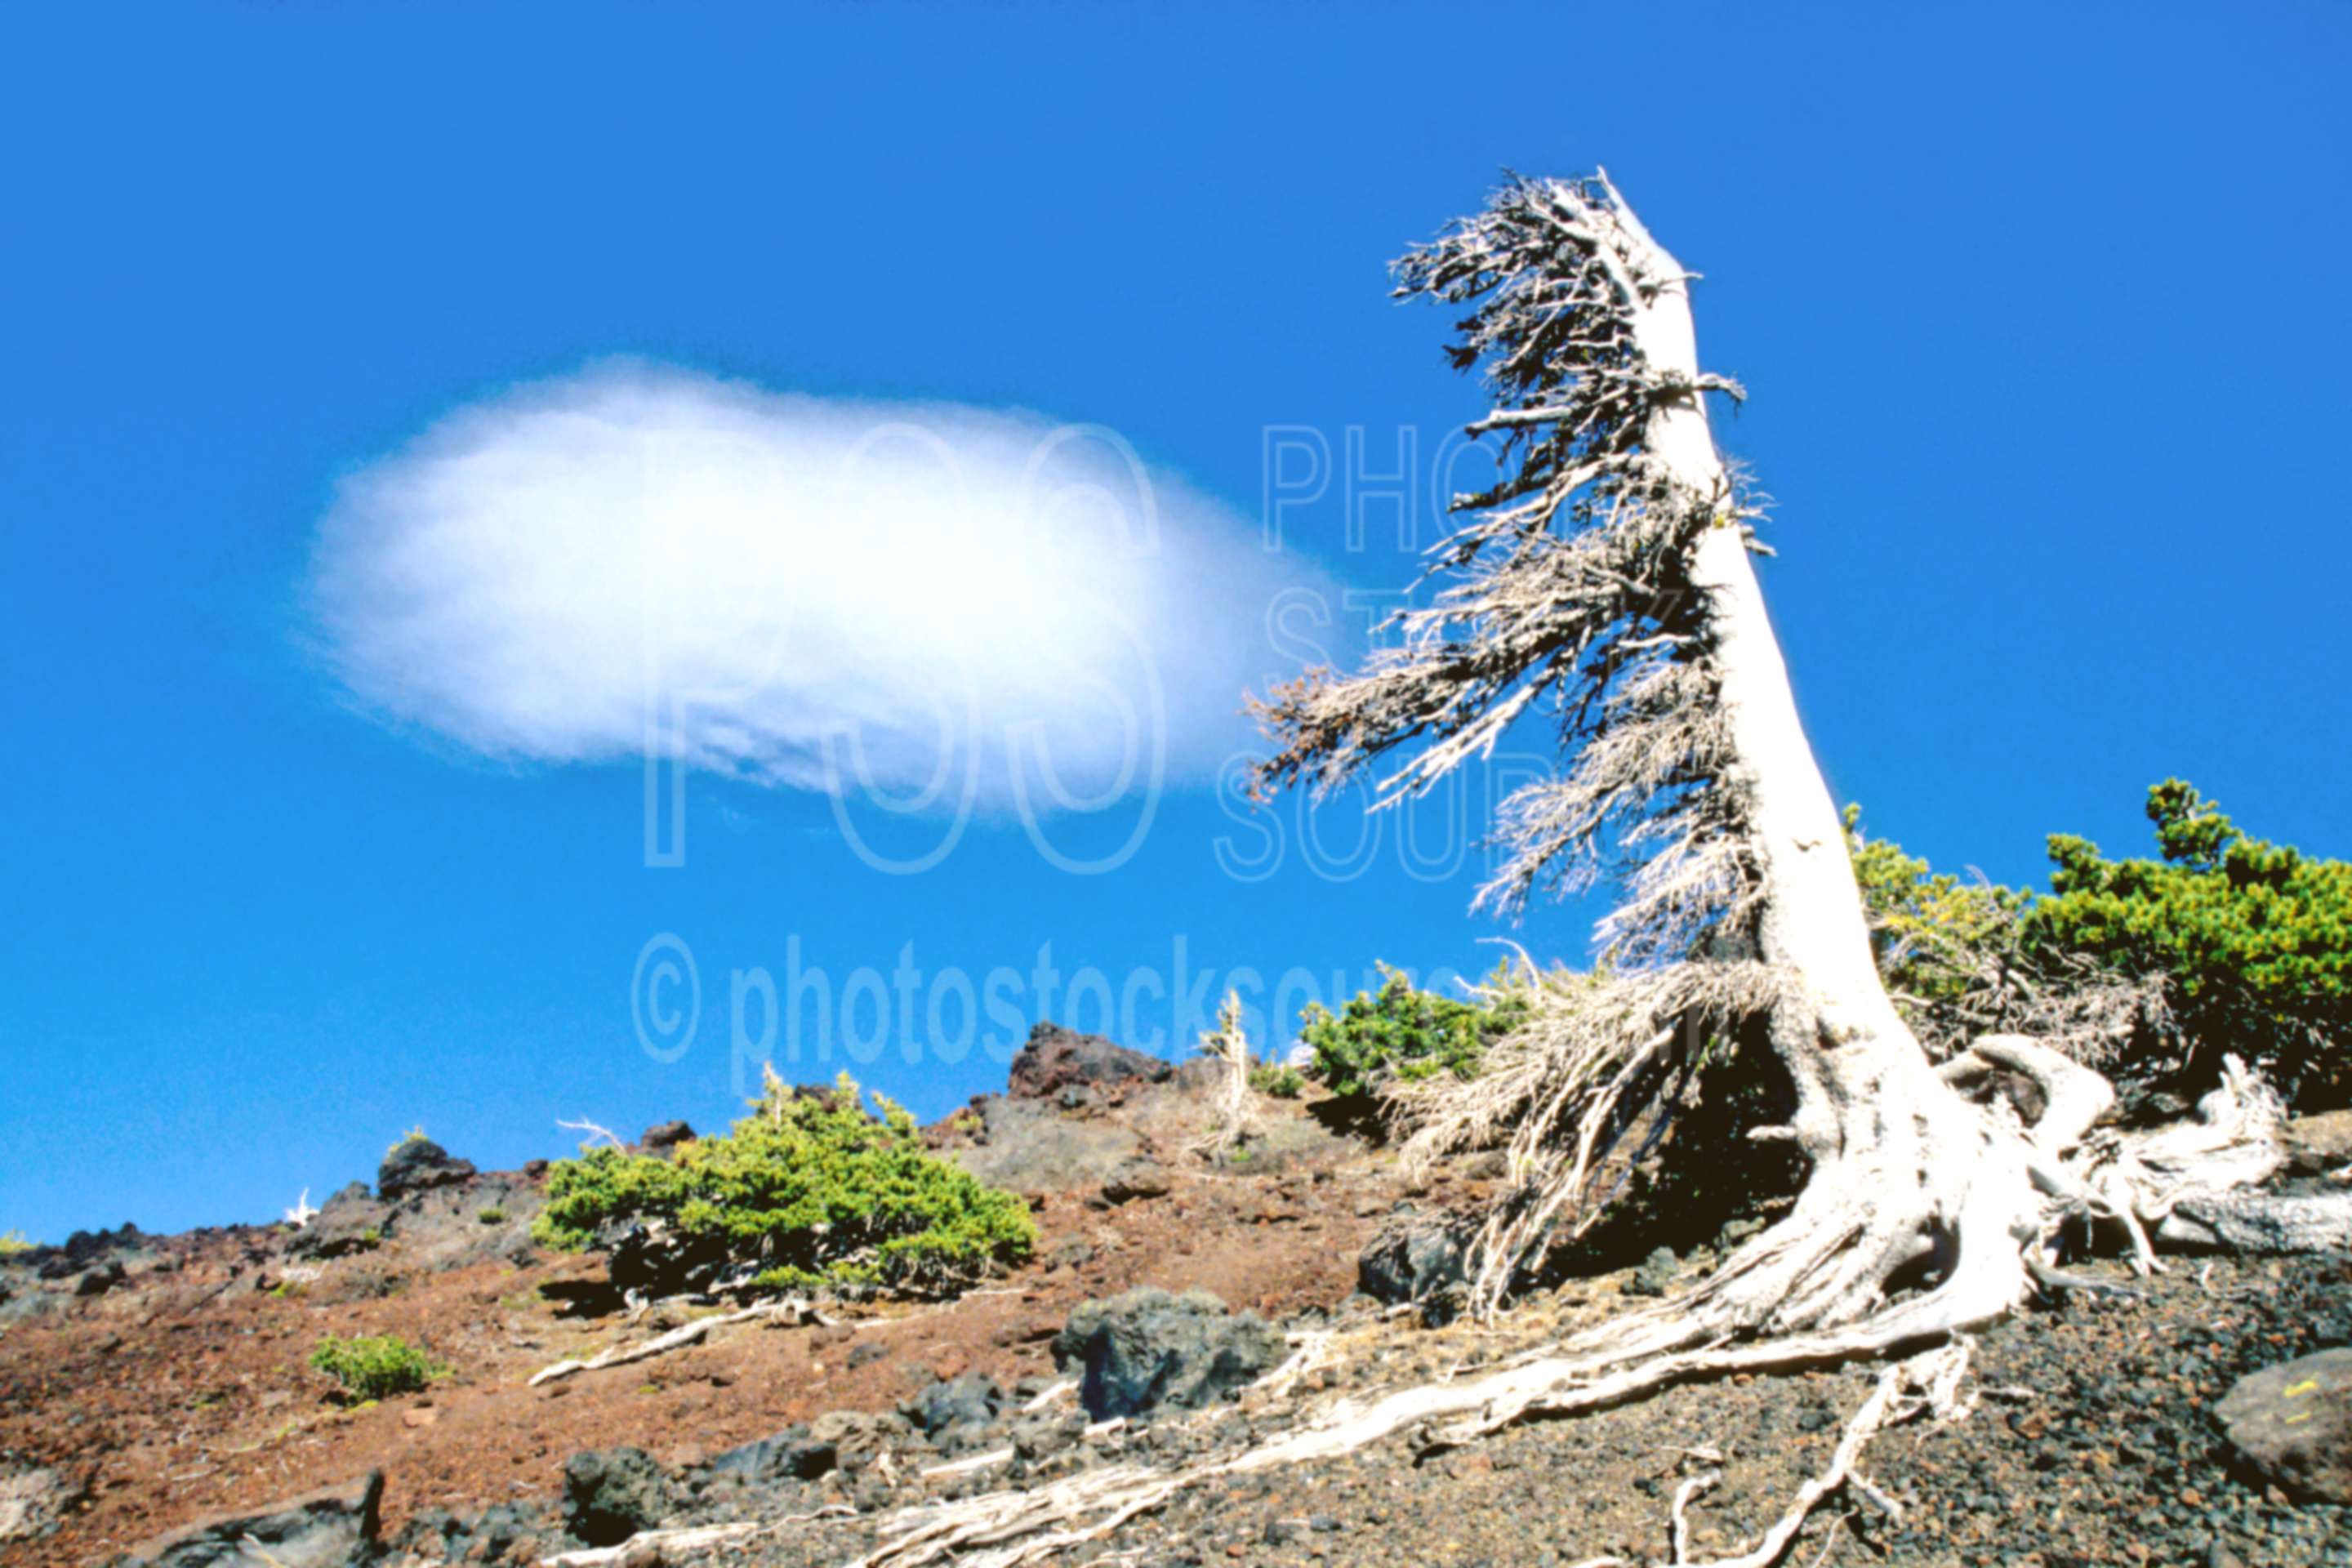 Cloud and Snag,cloud,snag,pacific crest trail,usas,mountains